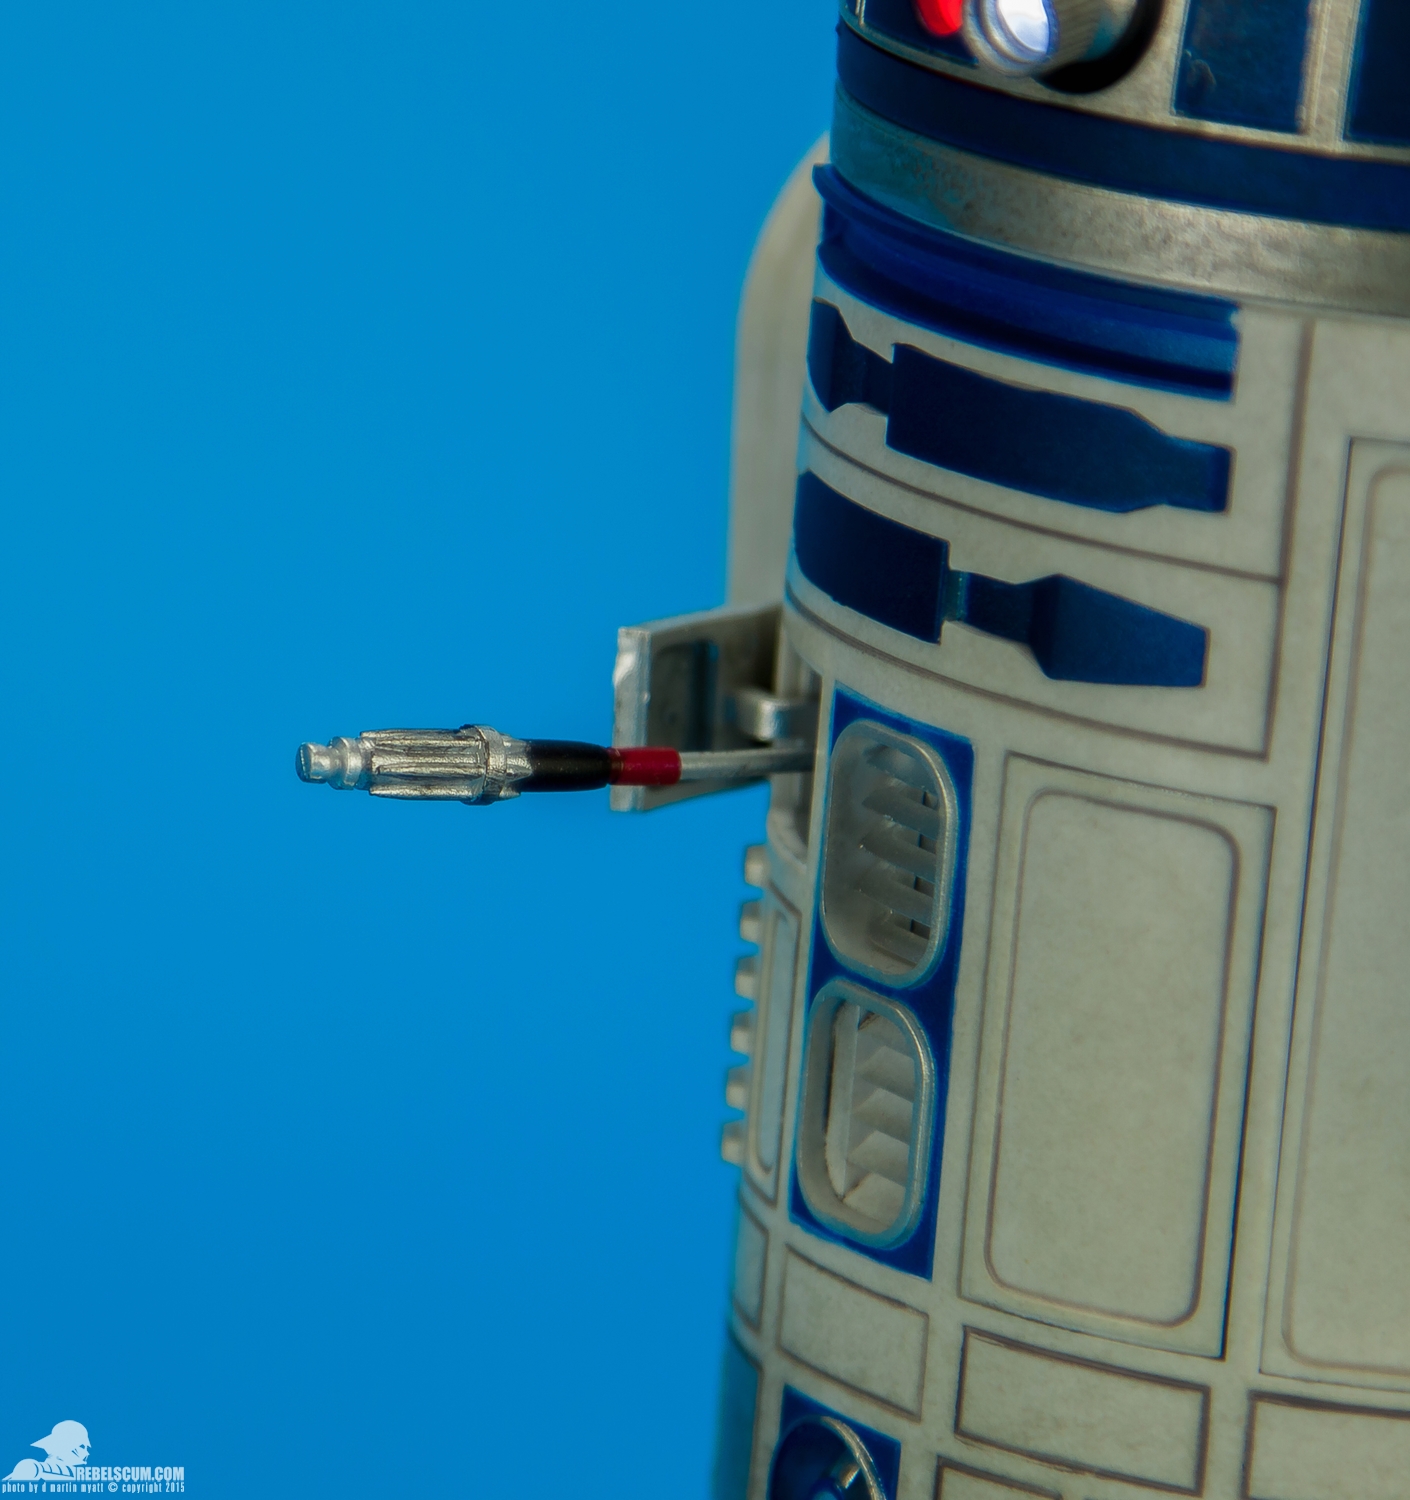 Sideshow-Collectibles-R2-D2-Sixth-Scale-Figure-Review-033.jpg